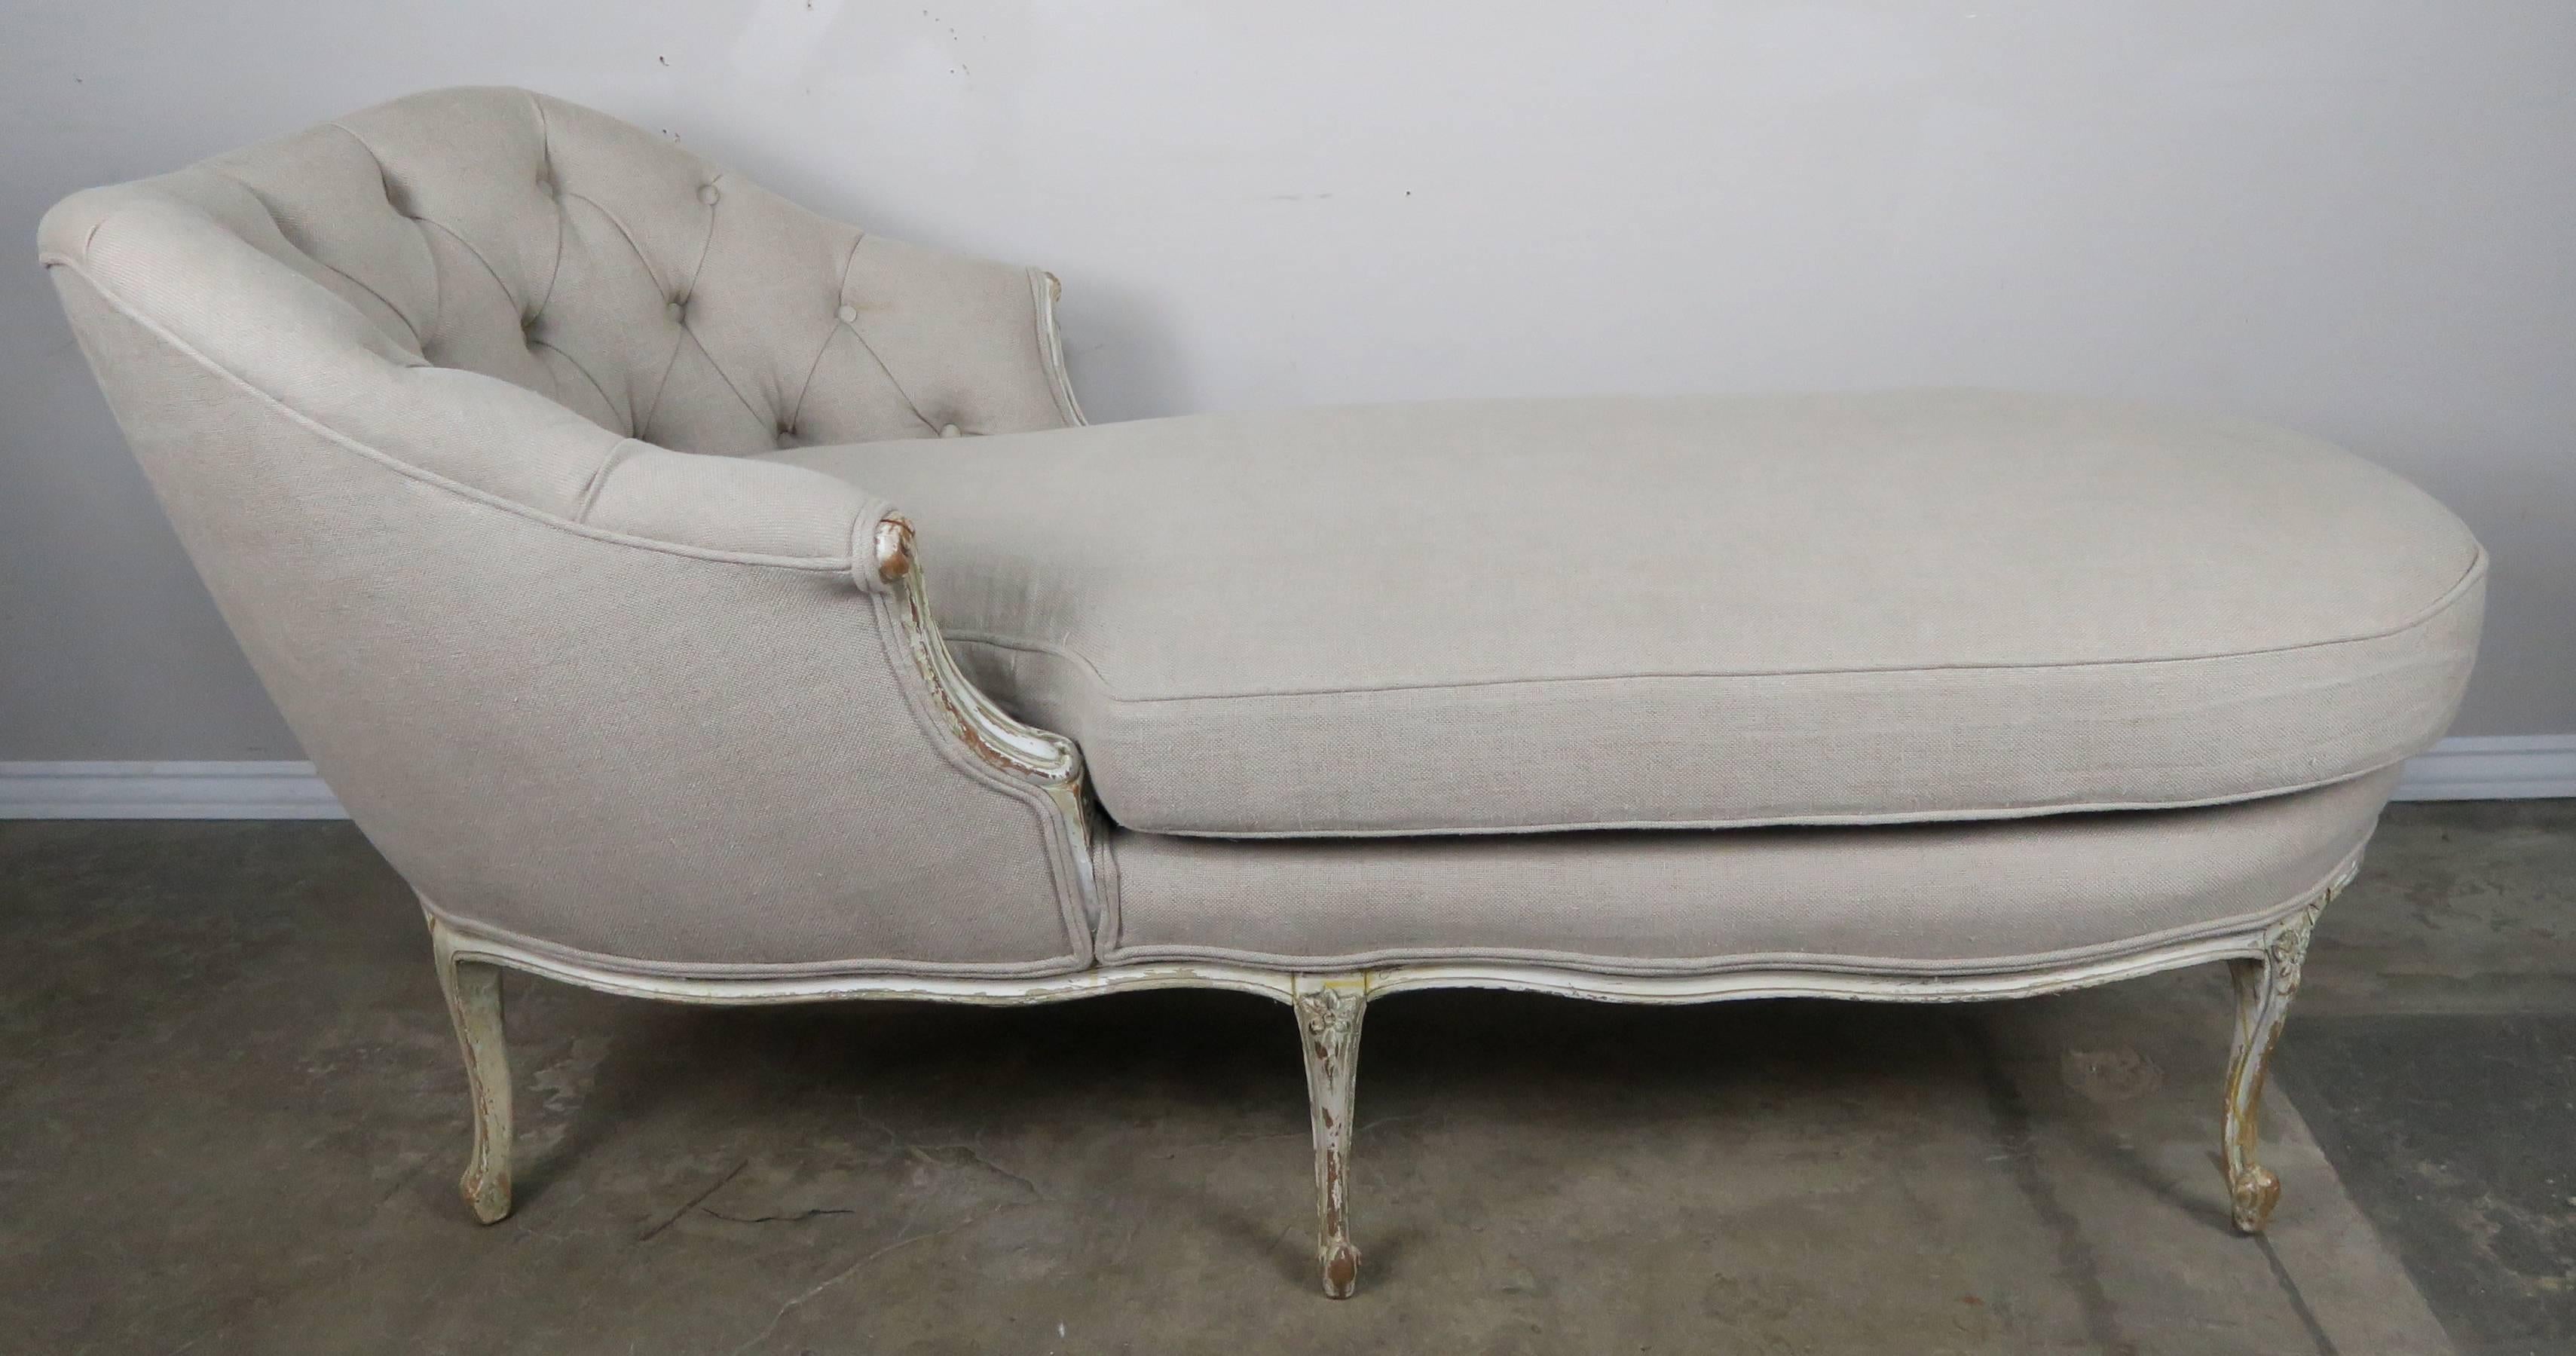 French painted Louis XV style chaise standing on six cabriole legs ending in rams head feet. The chaise is newly upholstered with a tufted tight back and loose seat cushion in a washed Belgium linen textile.
Measure: S.H. 21